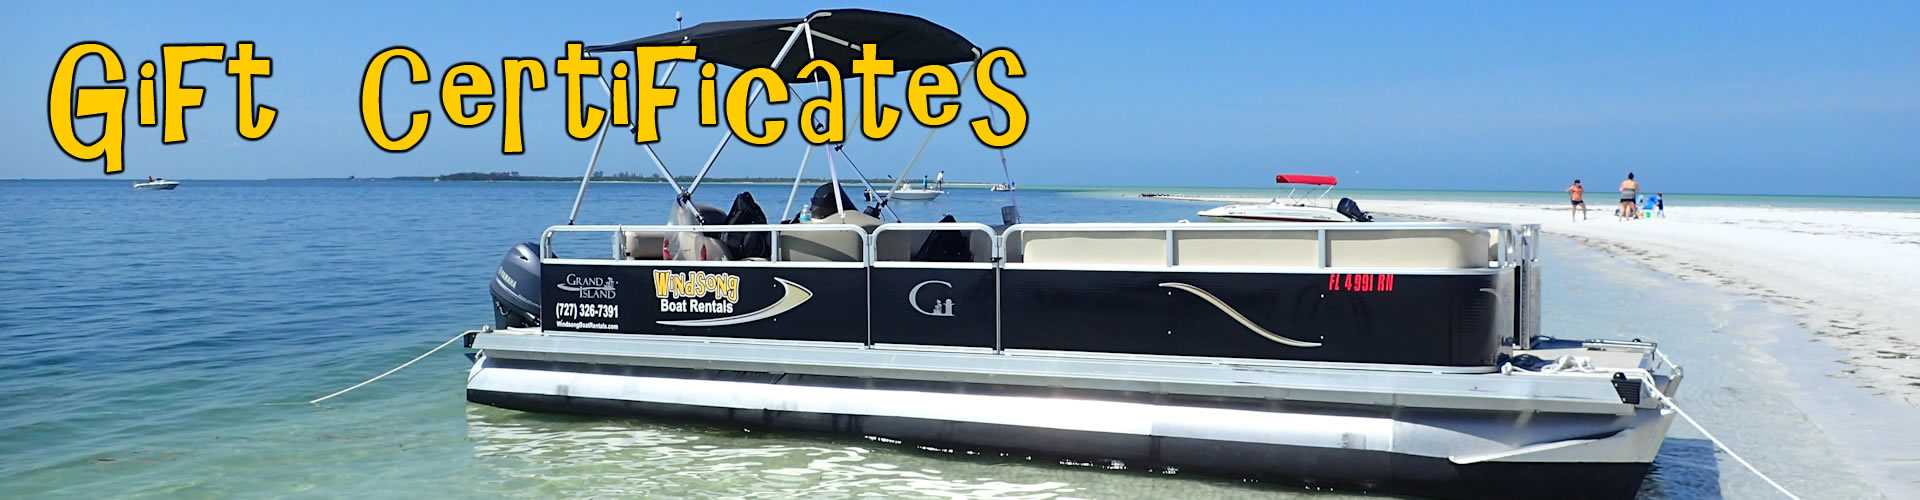 Contact Windsong Boat Rentals